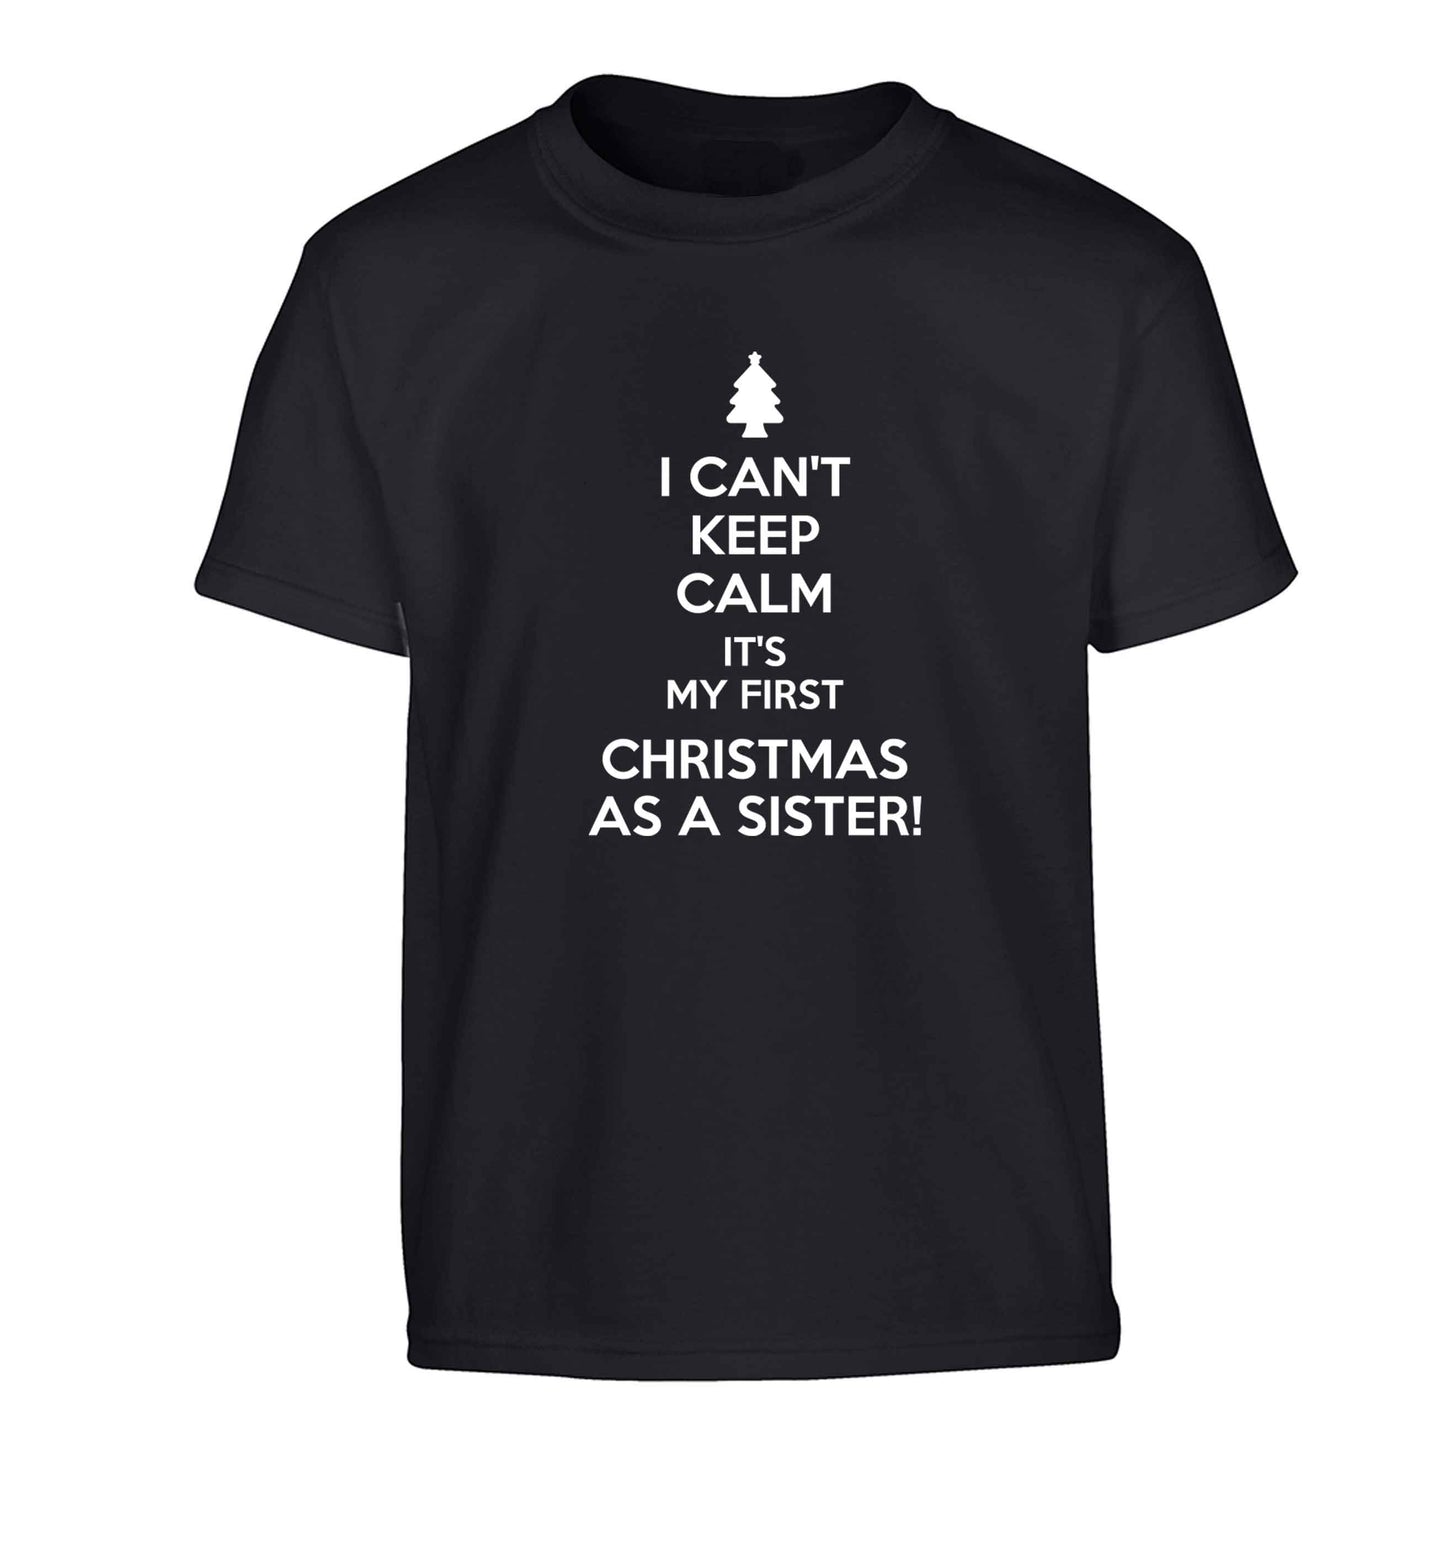 I can't keep calm it's my first Christmas as a sister! Children's black Tshirt 12-13 Years